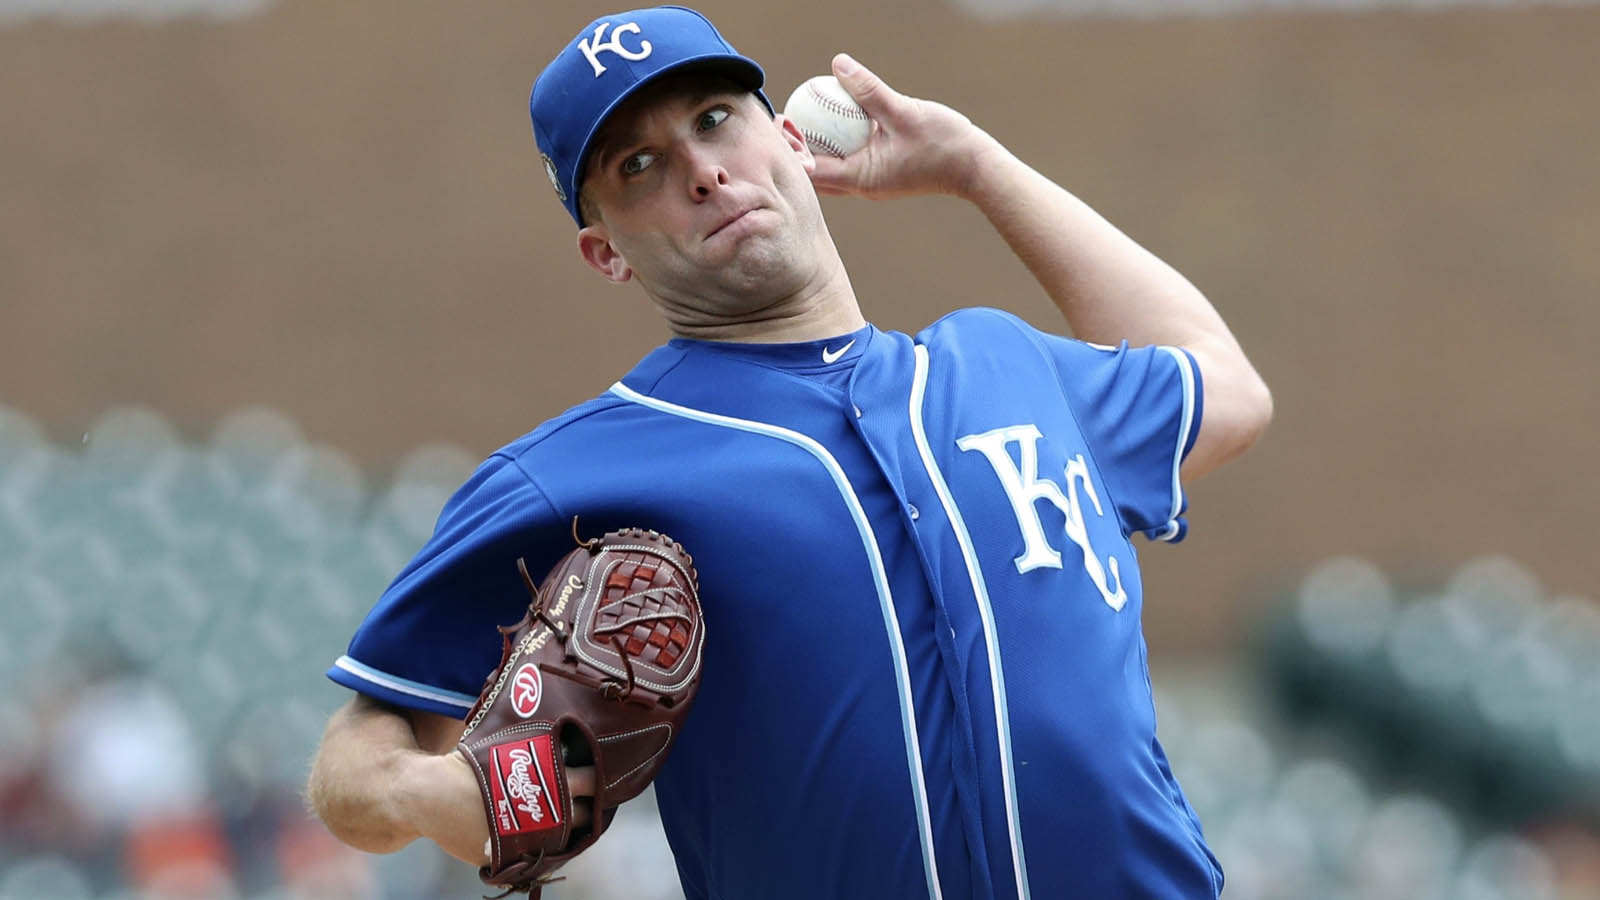 Royals suffer 12-4 loss to Tigers